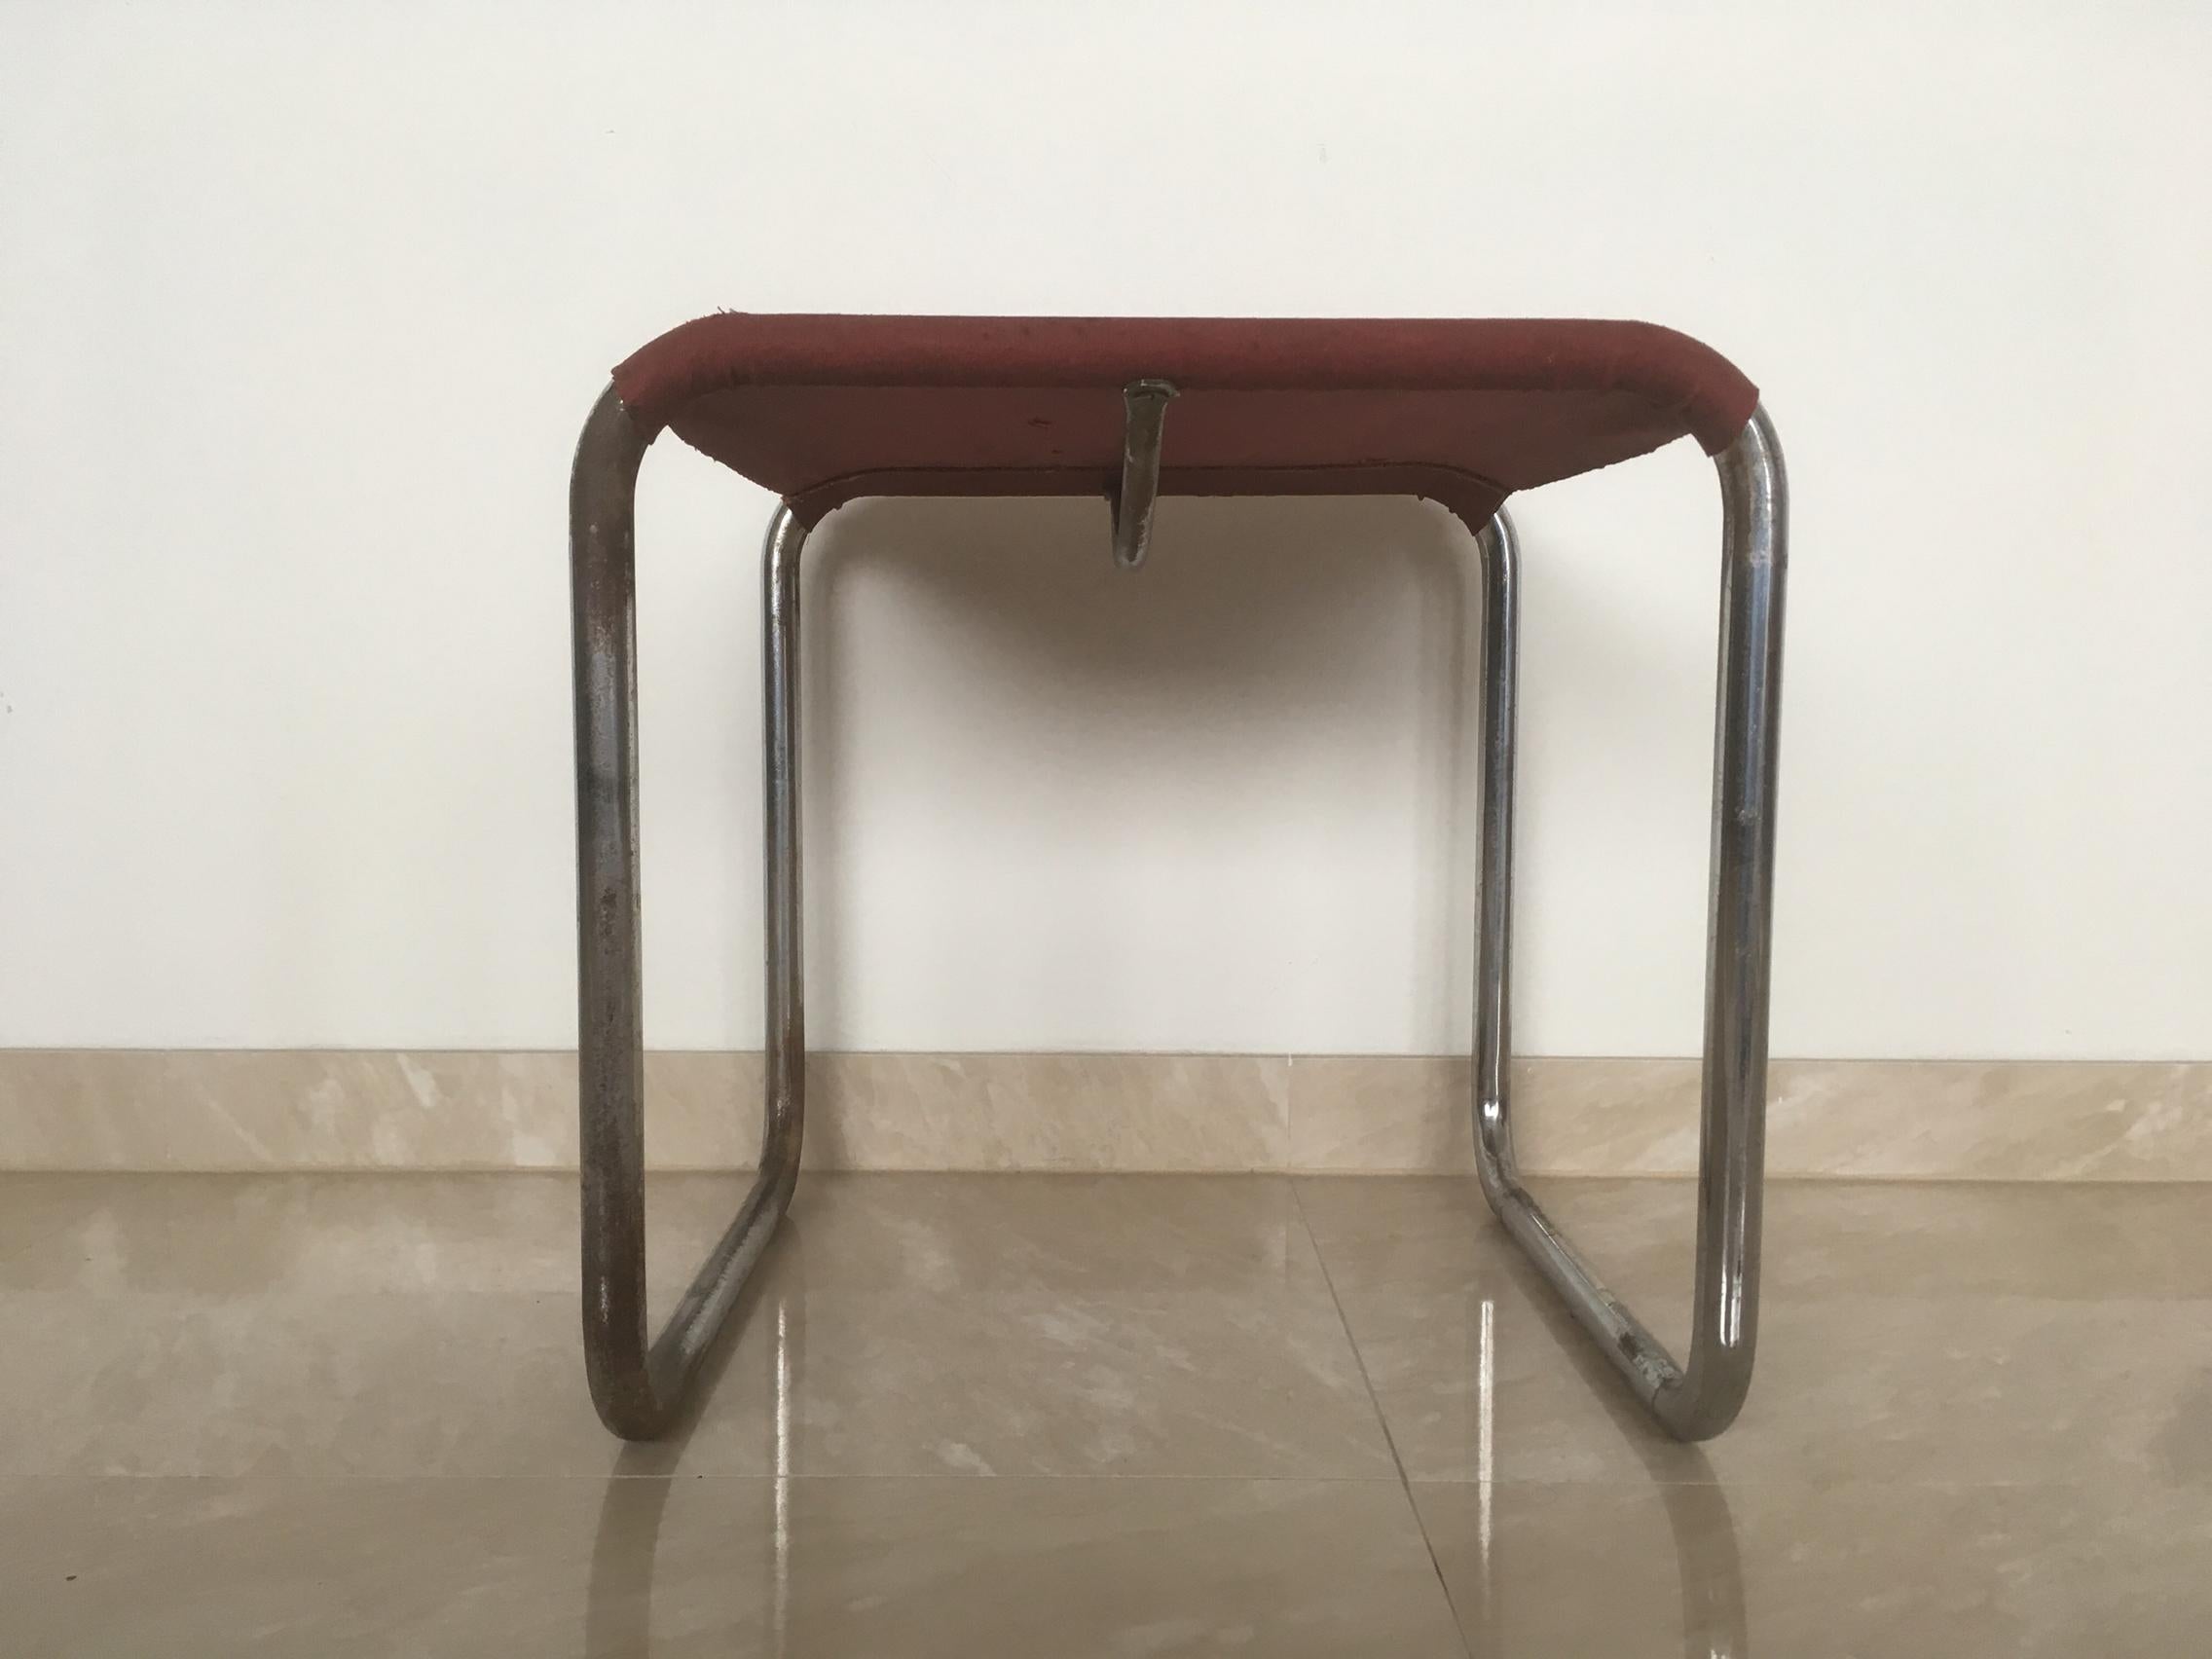 - 1930s, Thonet
- Design: Marcel Breuer
- Original condition, chrome with patina
- Red Eisengarn/Iron fabric,repaired, cleaned
- Rarly production with screws.